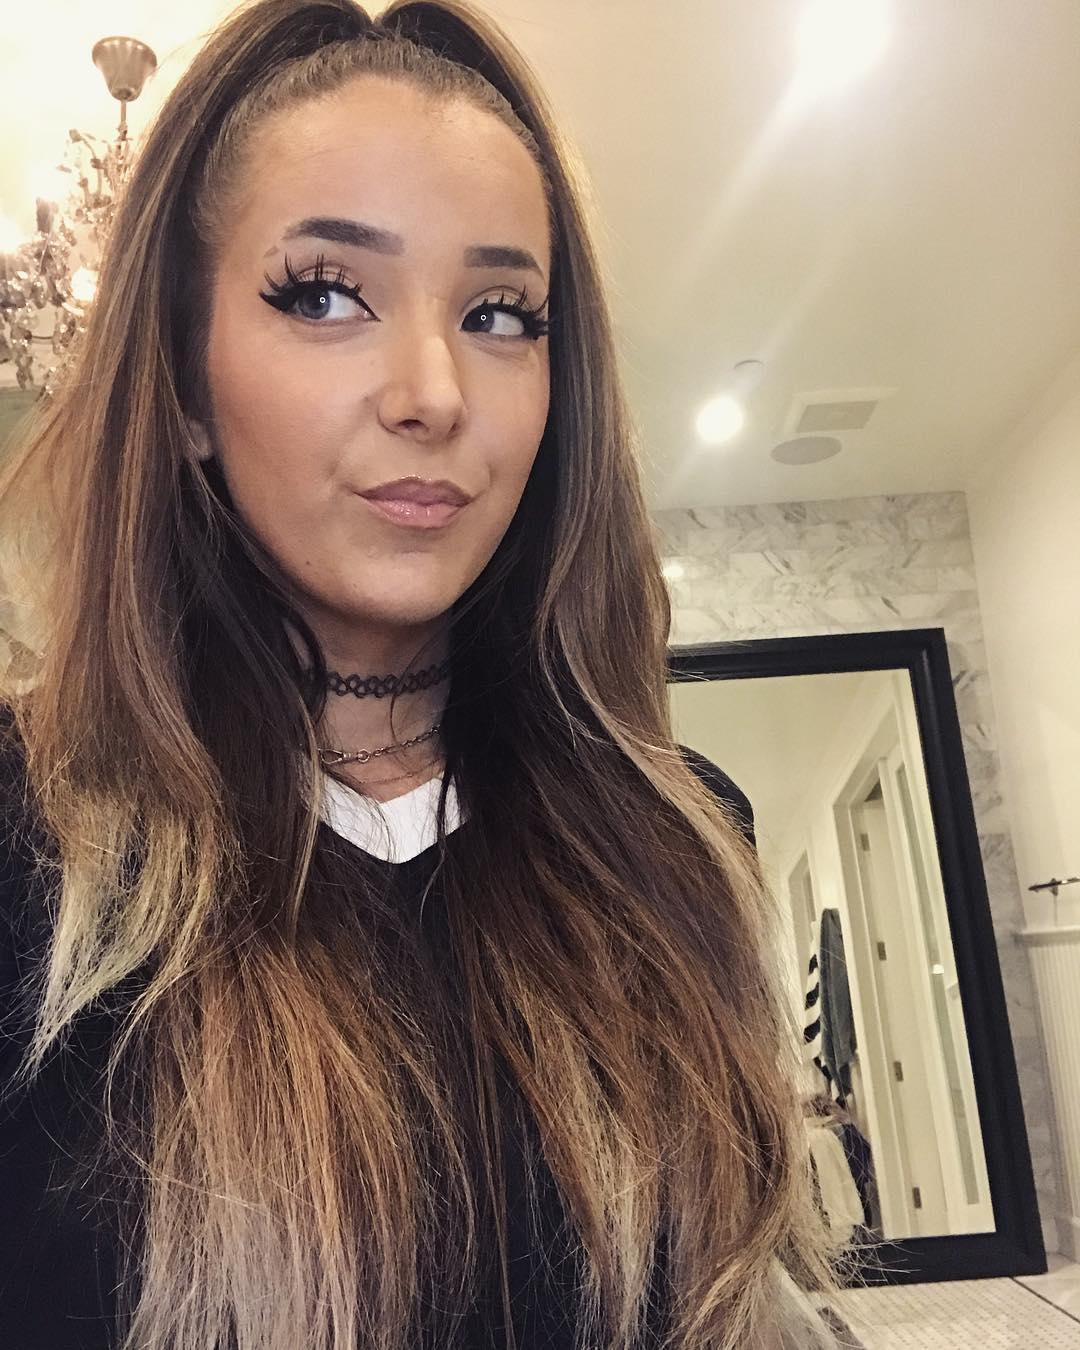 70+ Hot Pictures Of Jenna Marbles Prove She Is The Hottest Youtuber 62